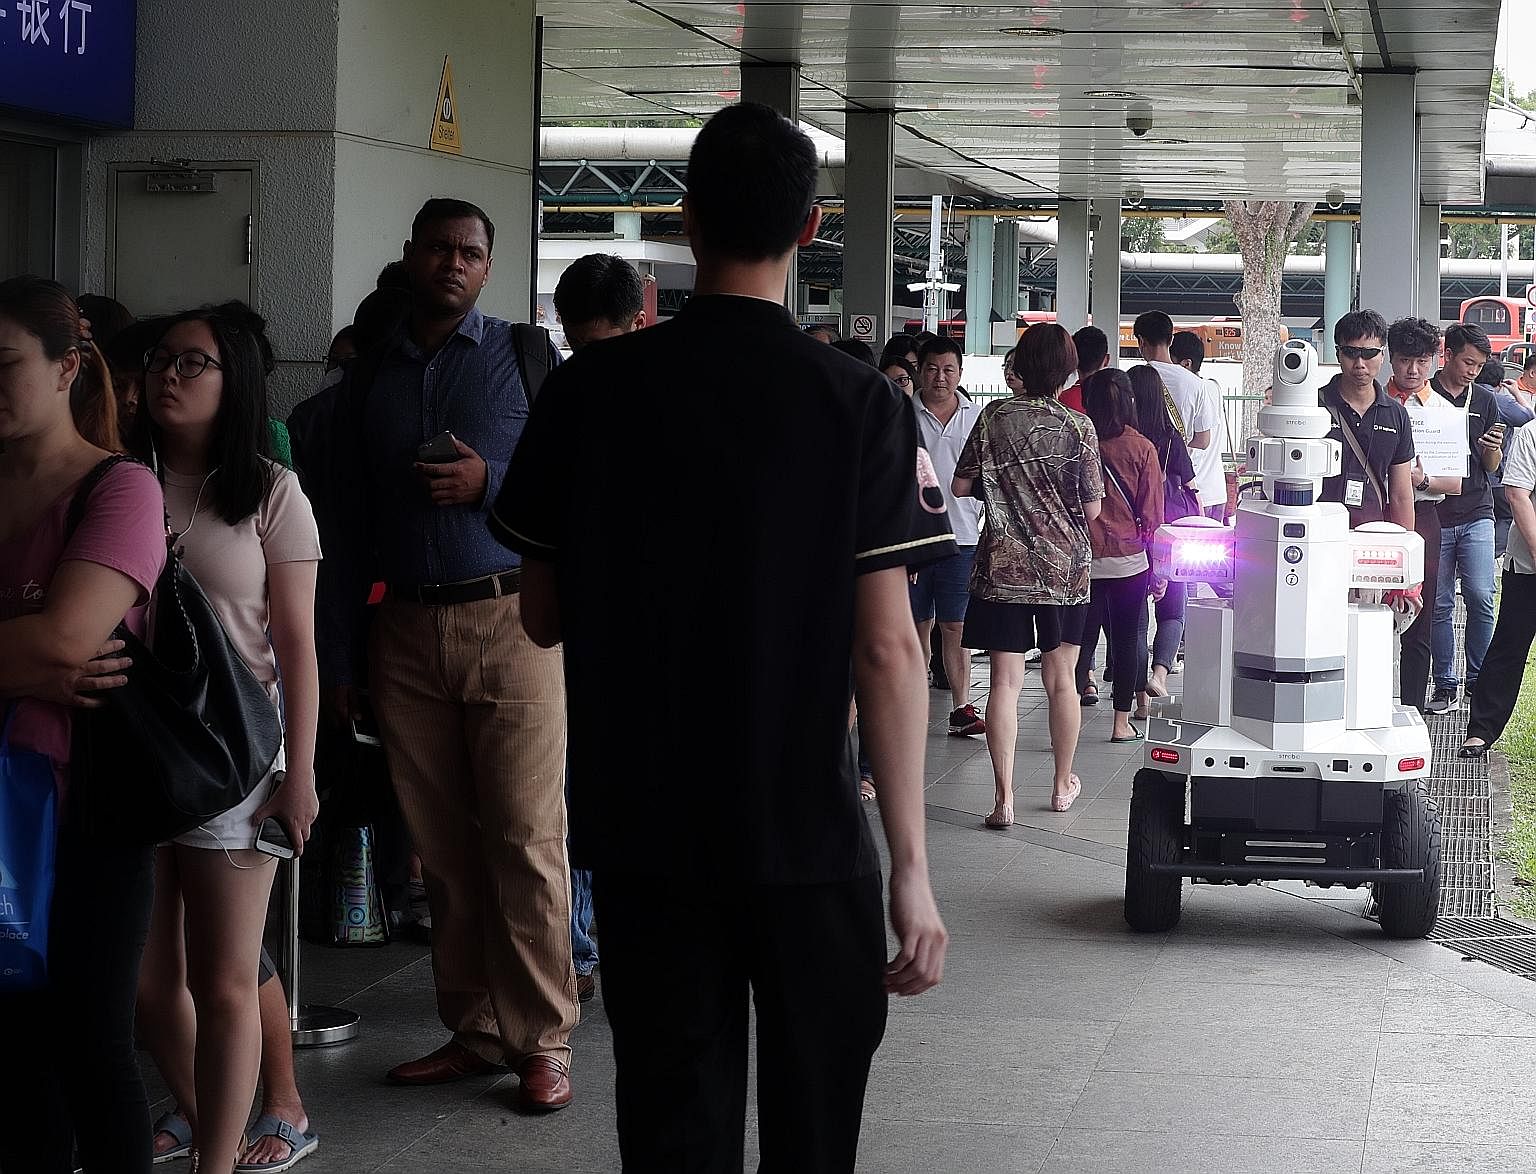 An autonomous robot kept an eye on Hougang MRT station yesterday as part of Exercise Station Guard, an emergency preparedness exercise by the Land Transport Authority (LTA). The 1.6m-tall robot, developed by ST Engineering, was being tested for its n